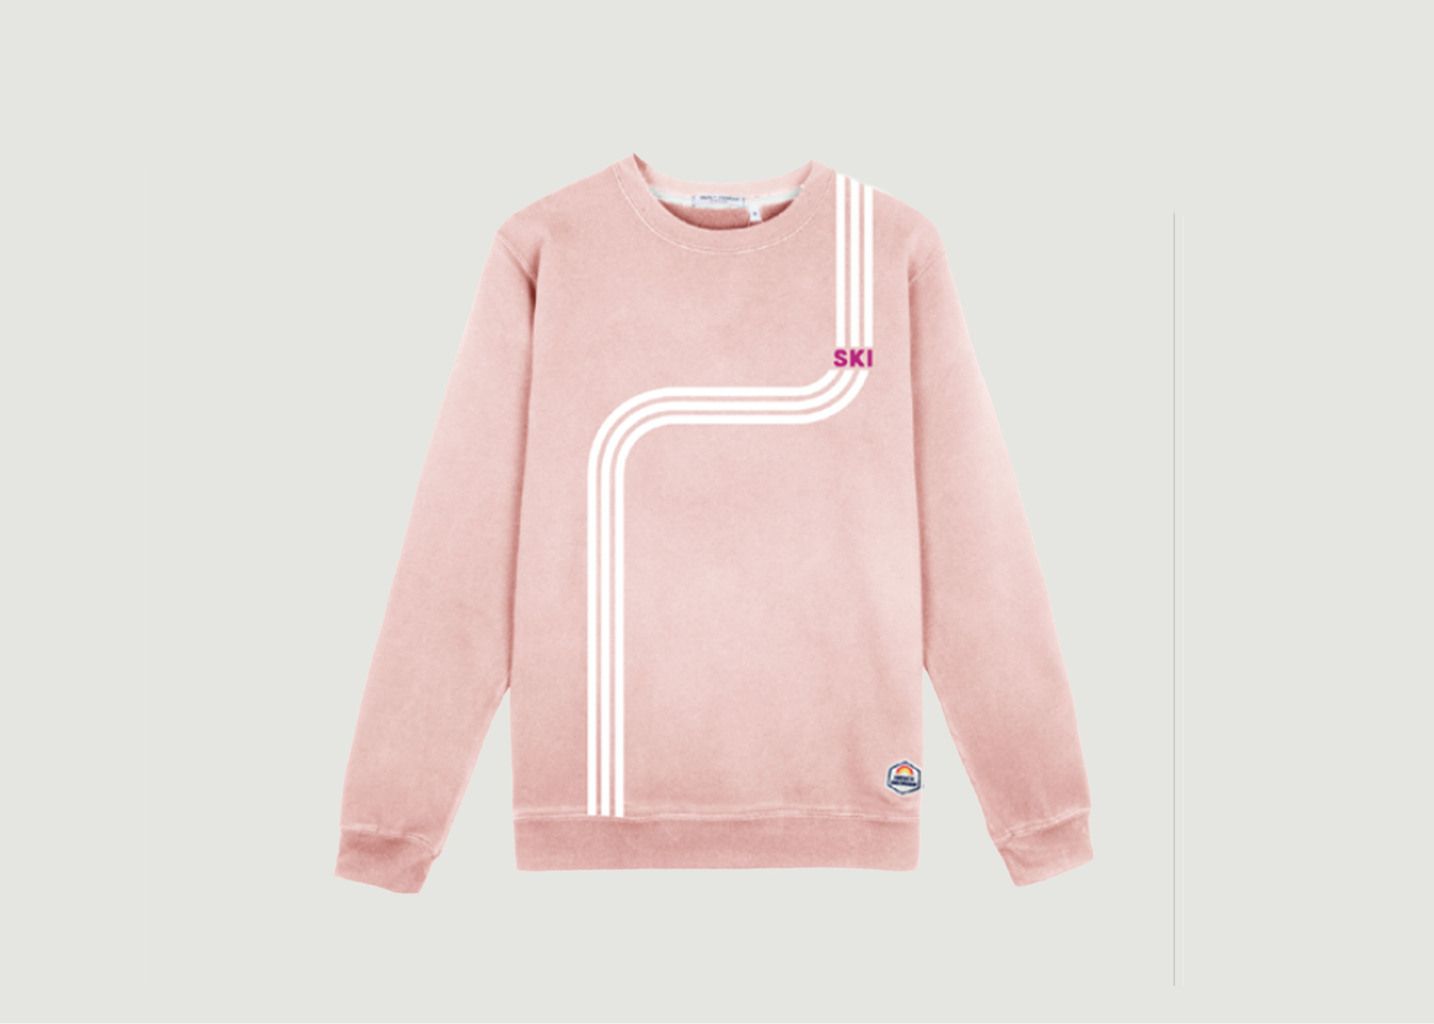 French Disorder Sky Lines Dylan Sweater